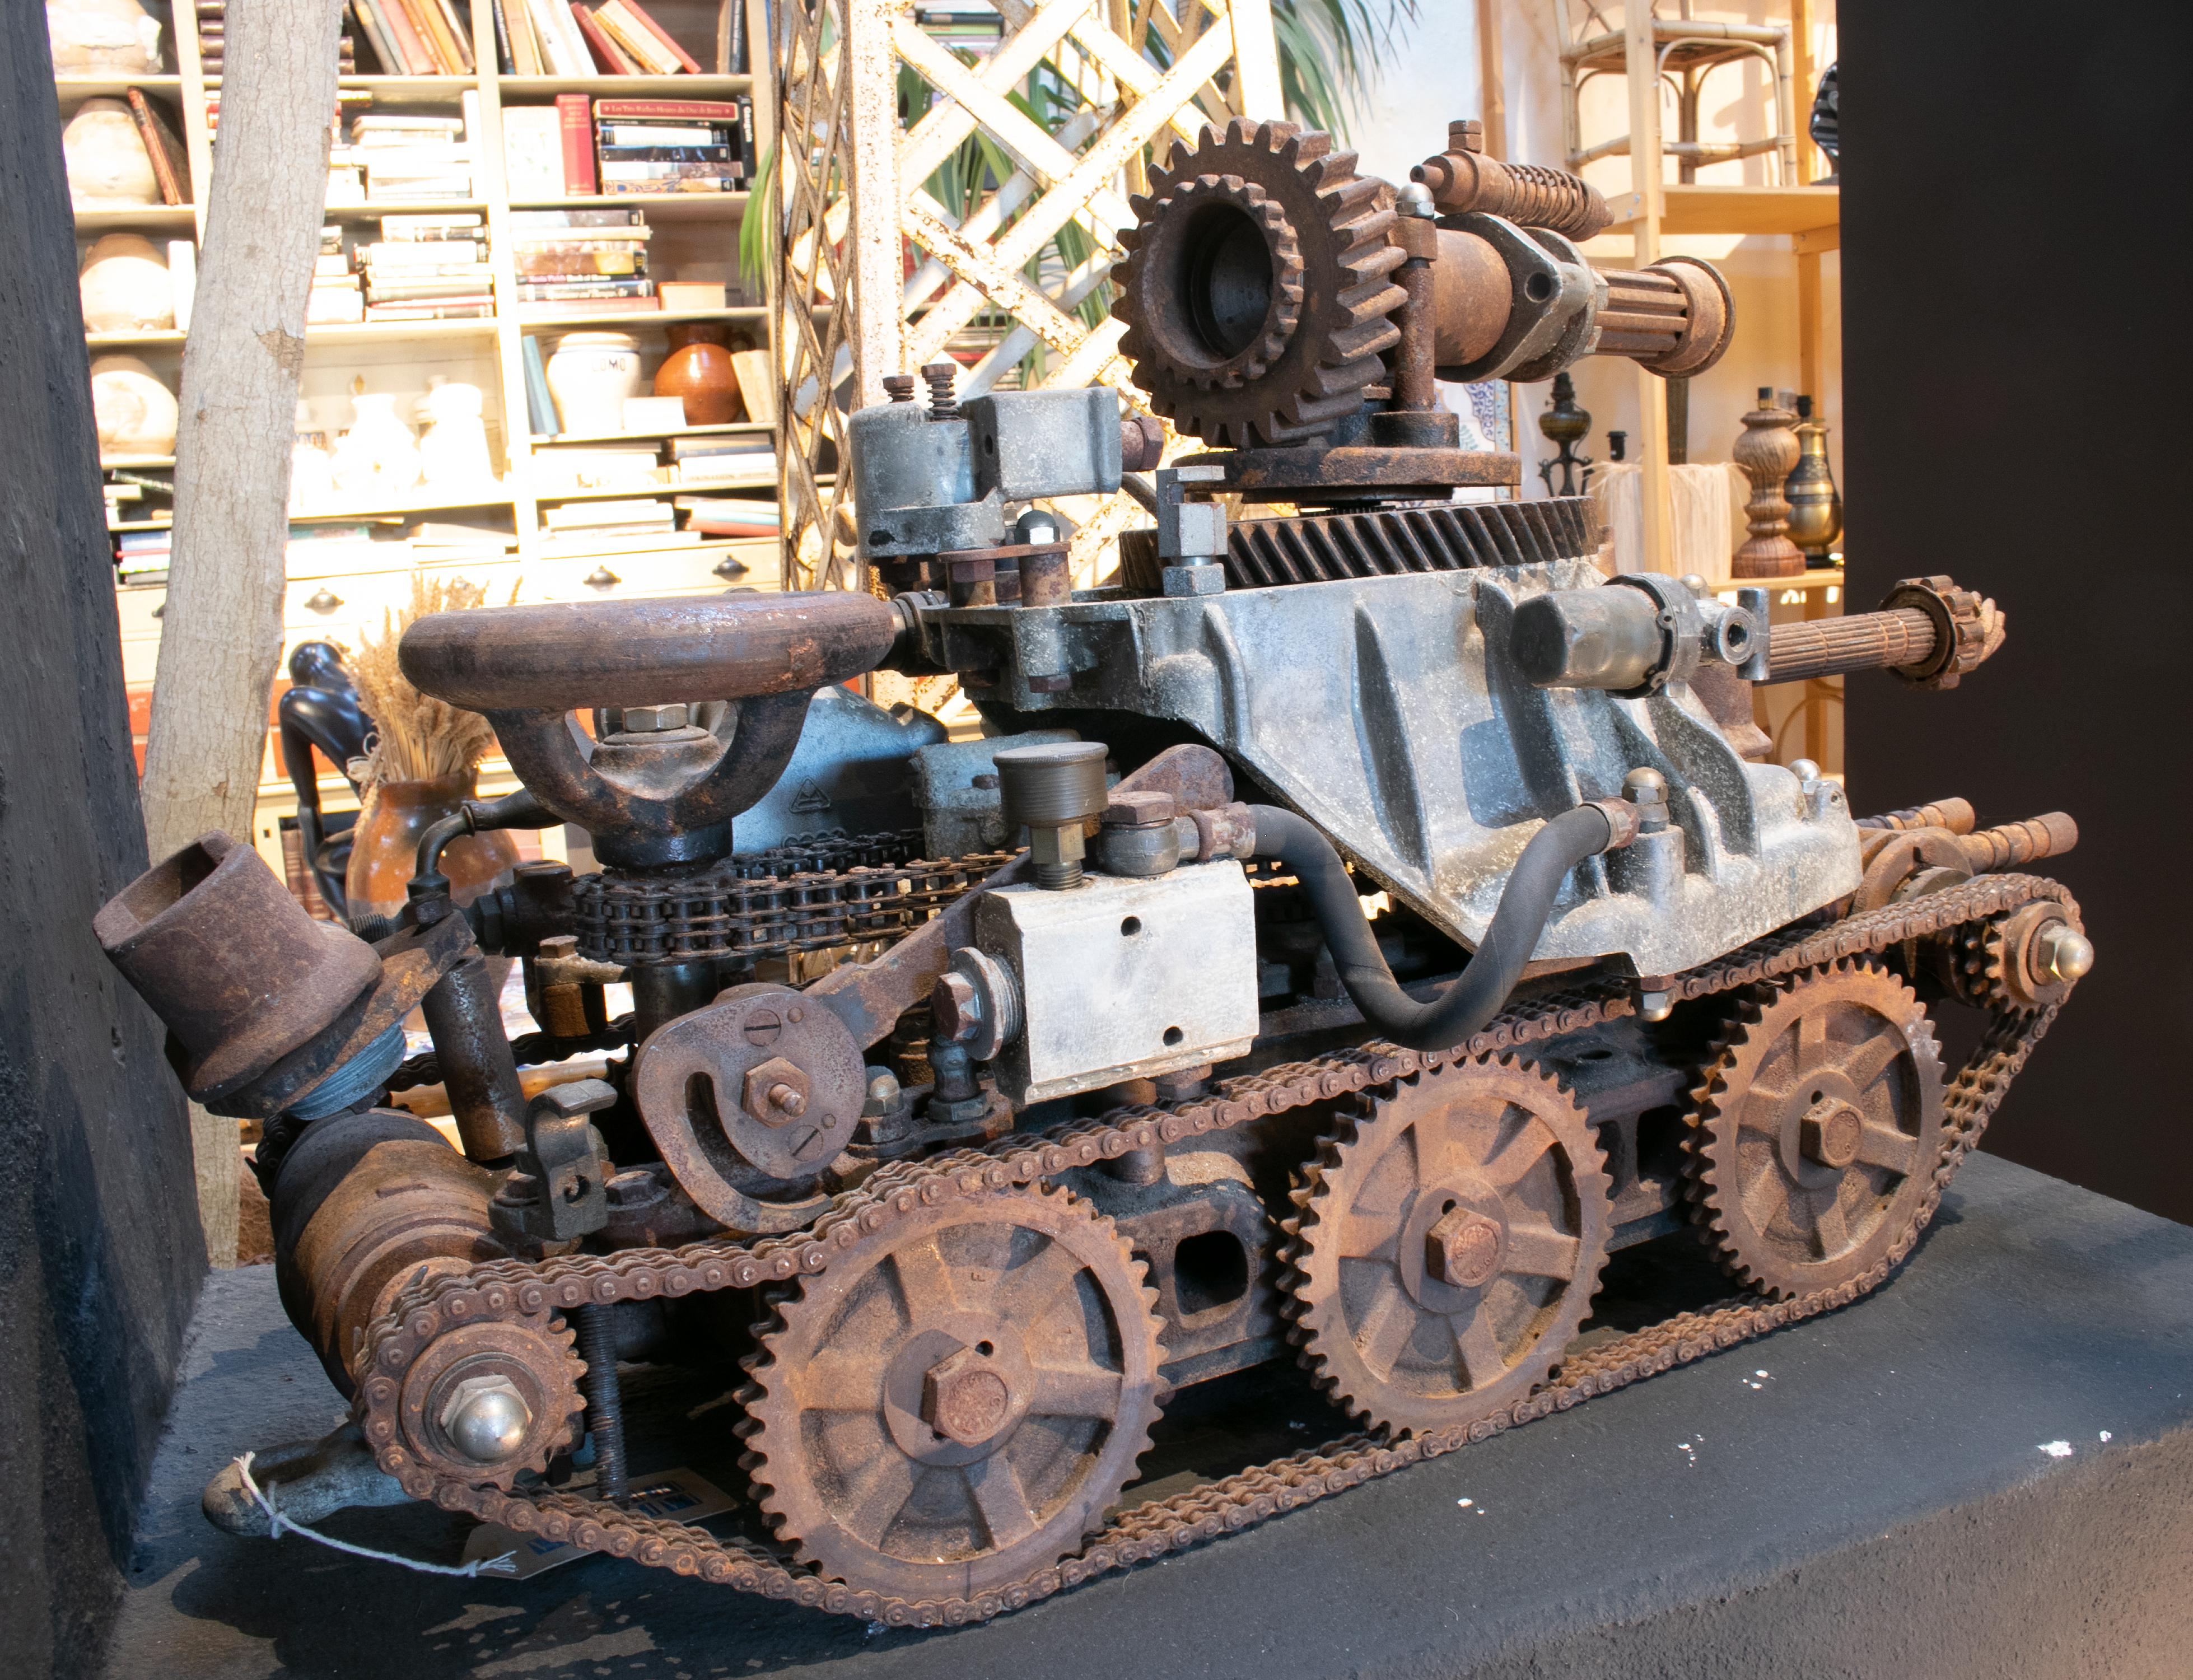 1970s tank with cannon sculpture made with assorted old mechanical metal pieces: cars, bikes, lawnmowers, etc.
 